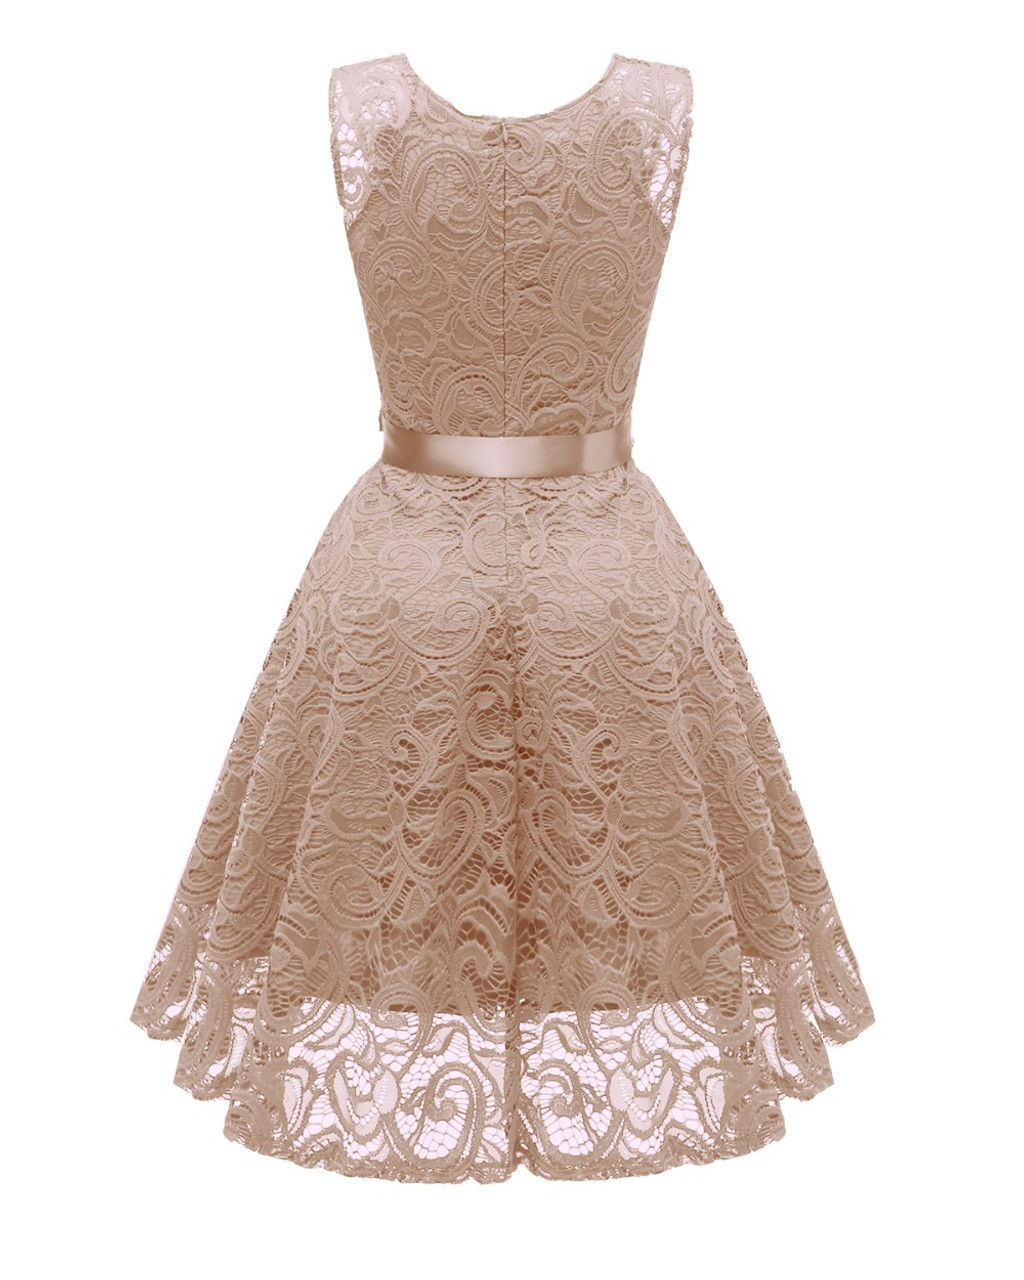 Custom Made 2018 Light Pink Lace Pink Lace Prom Dress With Spaghetti Straps  Perfect For Formal Events, Pageants, Graduations, And Evening Parties  Available In Plus Sizes From Dress1950s, $105.33 | DHgate.Com